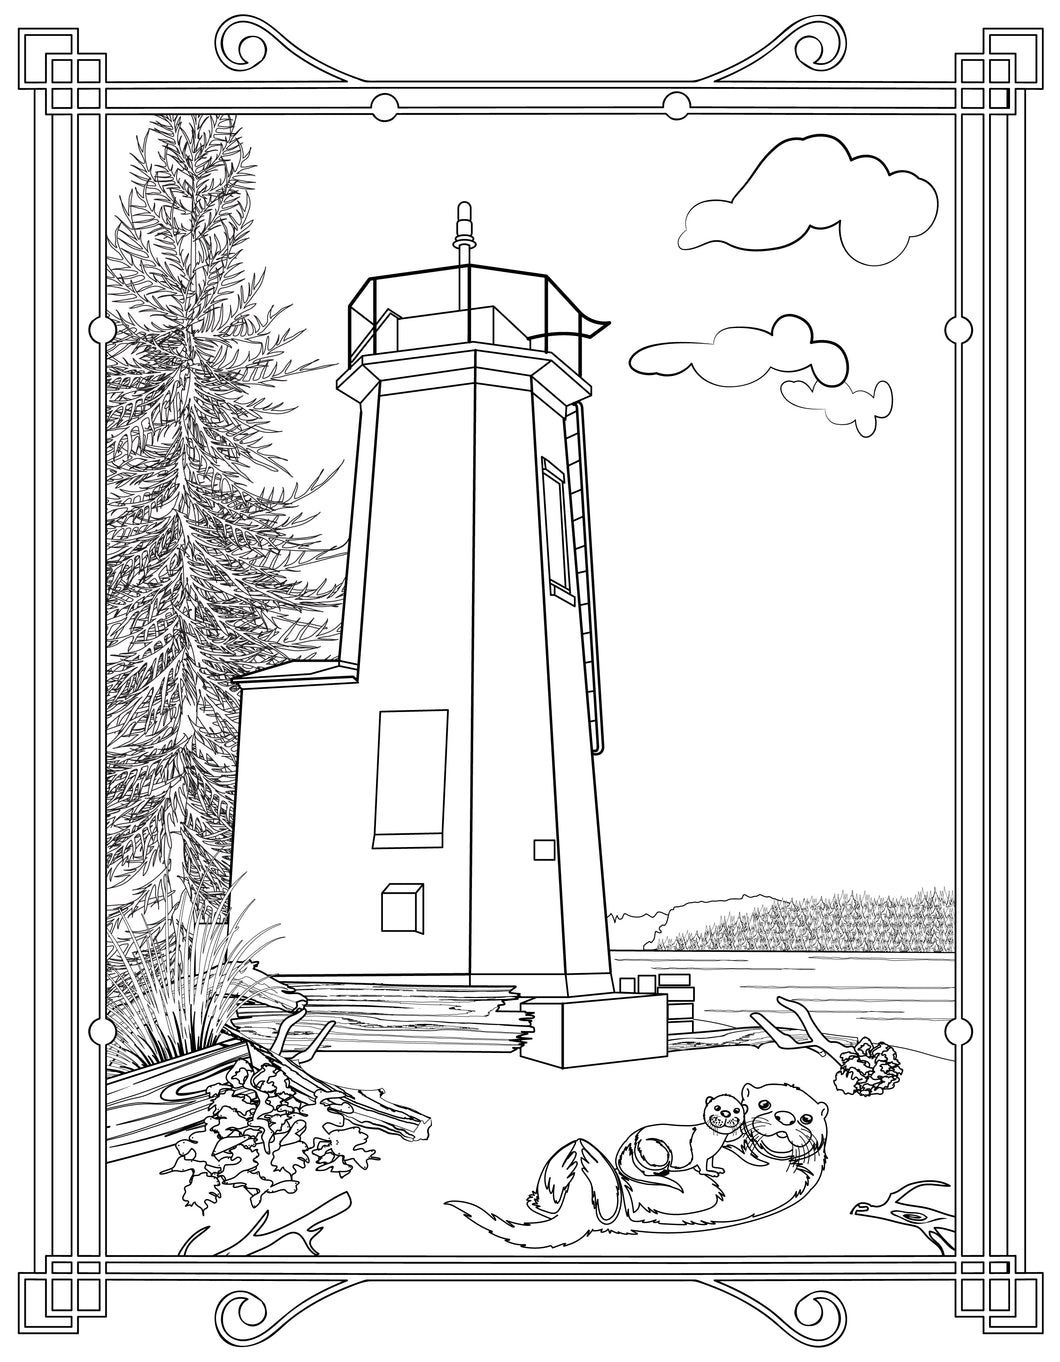 Single Coloring Book Page - Dofflemyer Point Lighthouse, Washington - Digital Print-from-Home